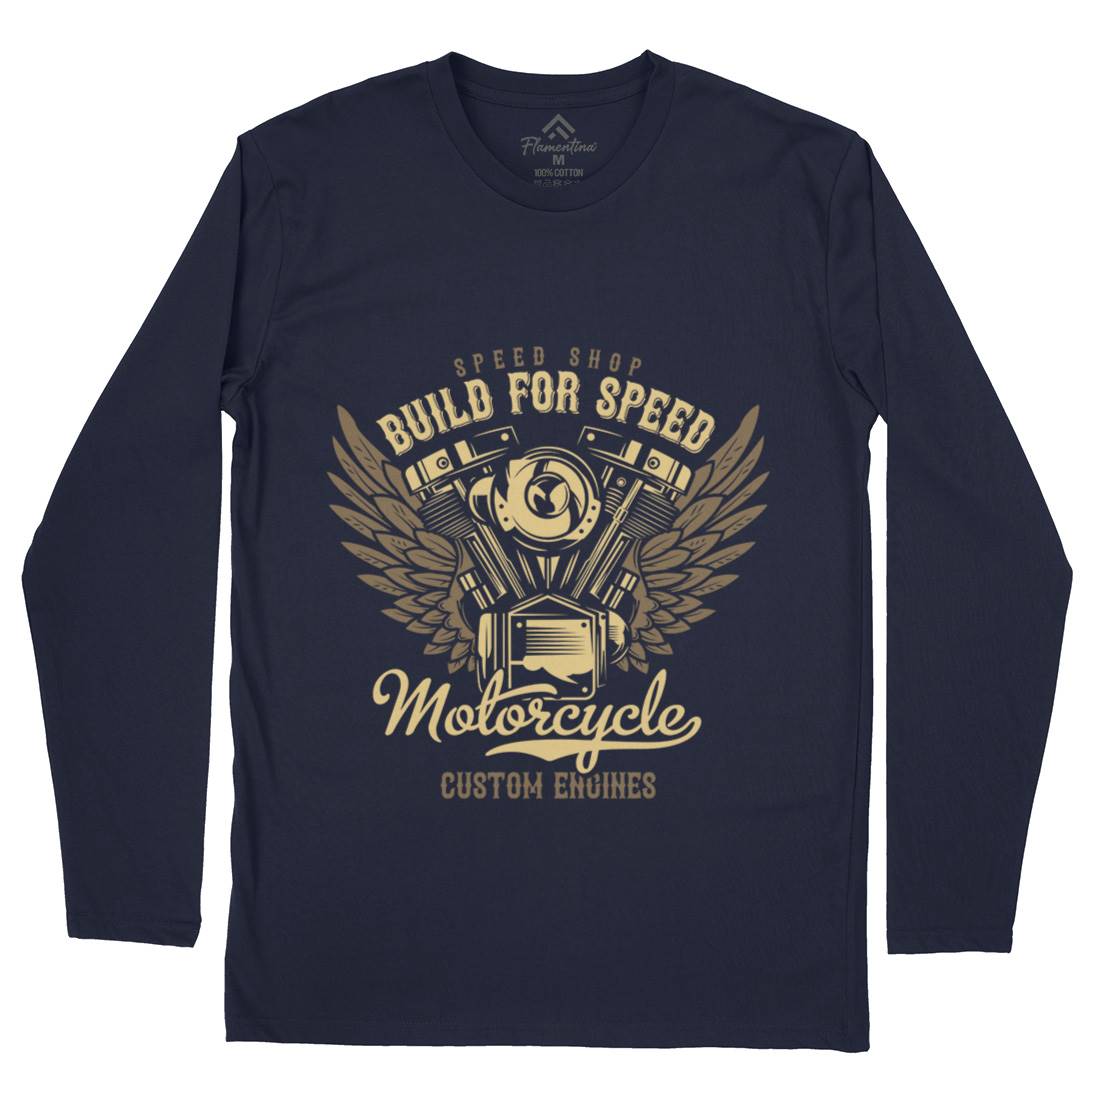 Build For Speed Mens Long Sleeve T-Shirt Motorcycles B842